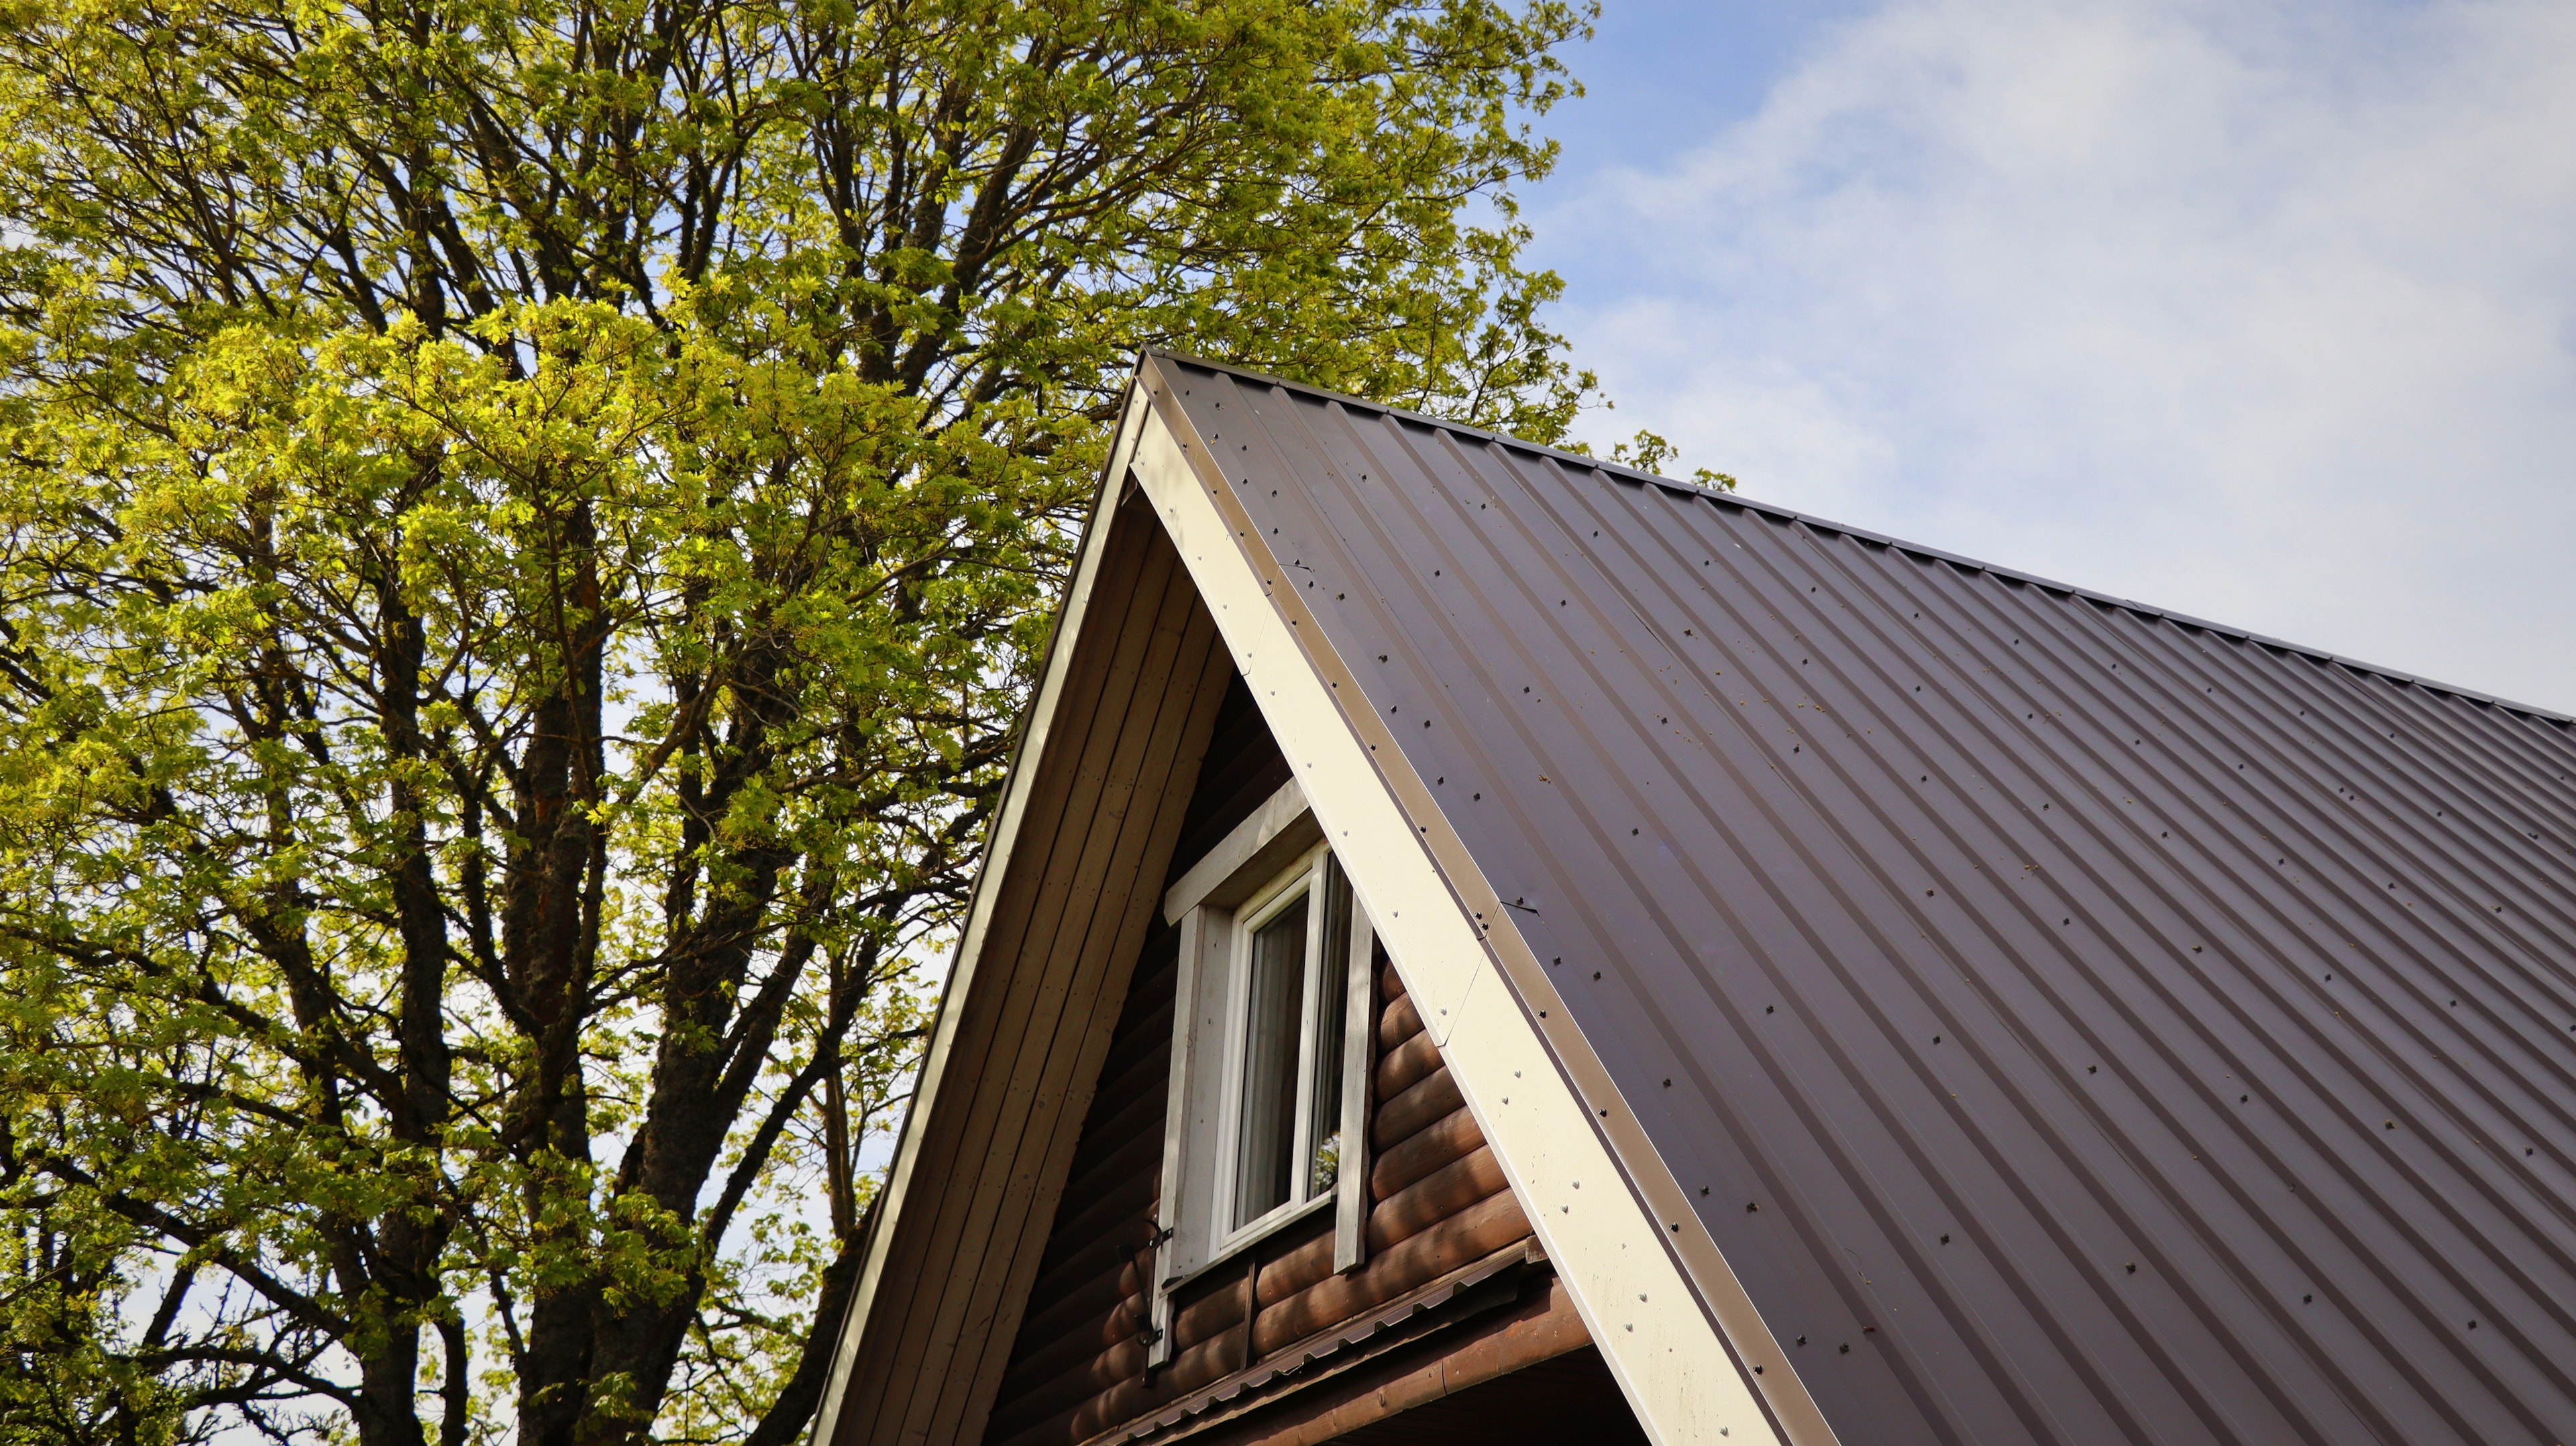 Quality, reliable metal roofs are always what you can count on at Buckhead Roofing